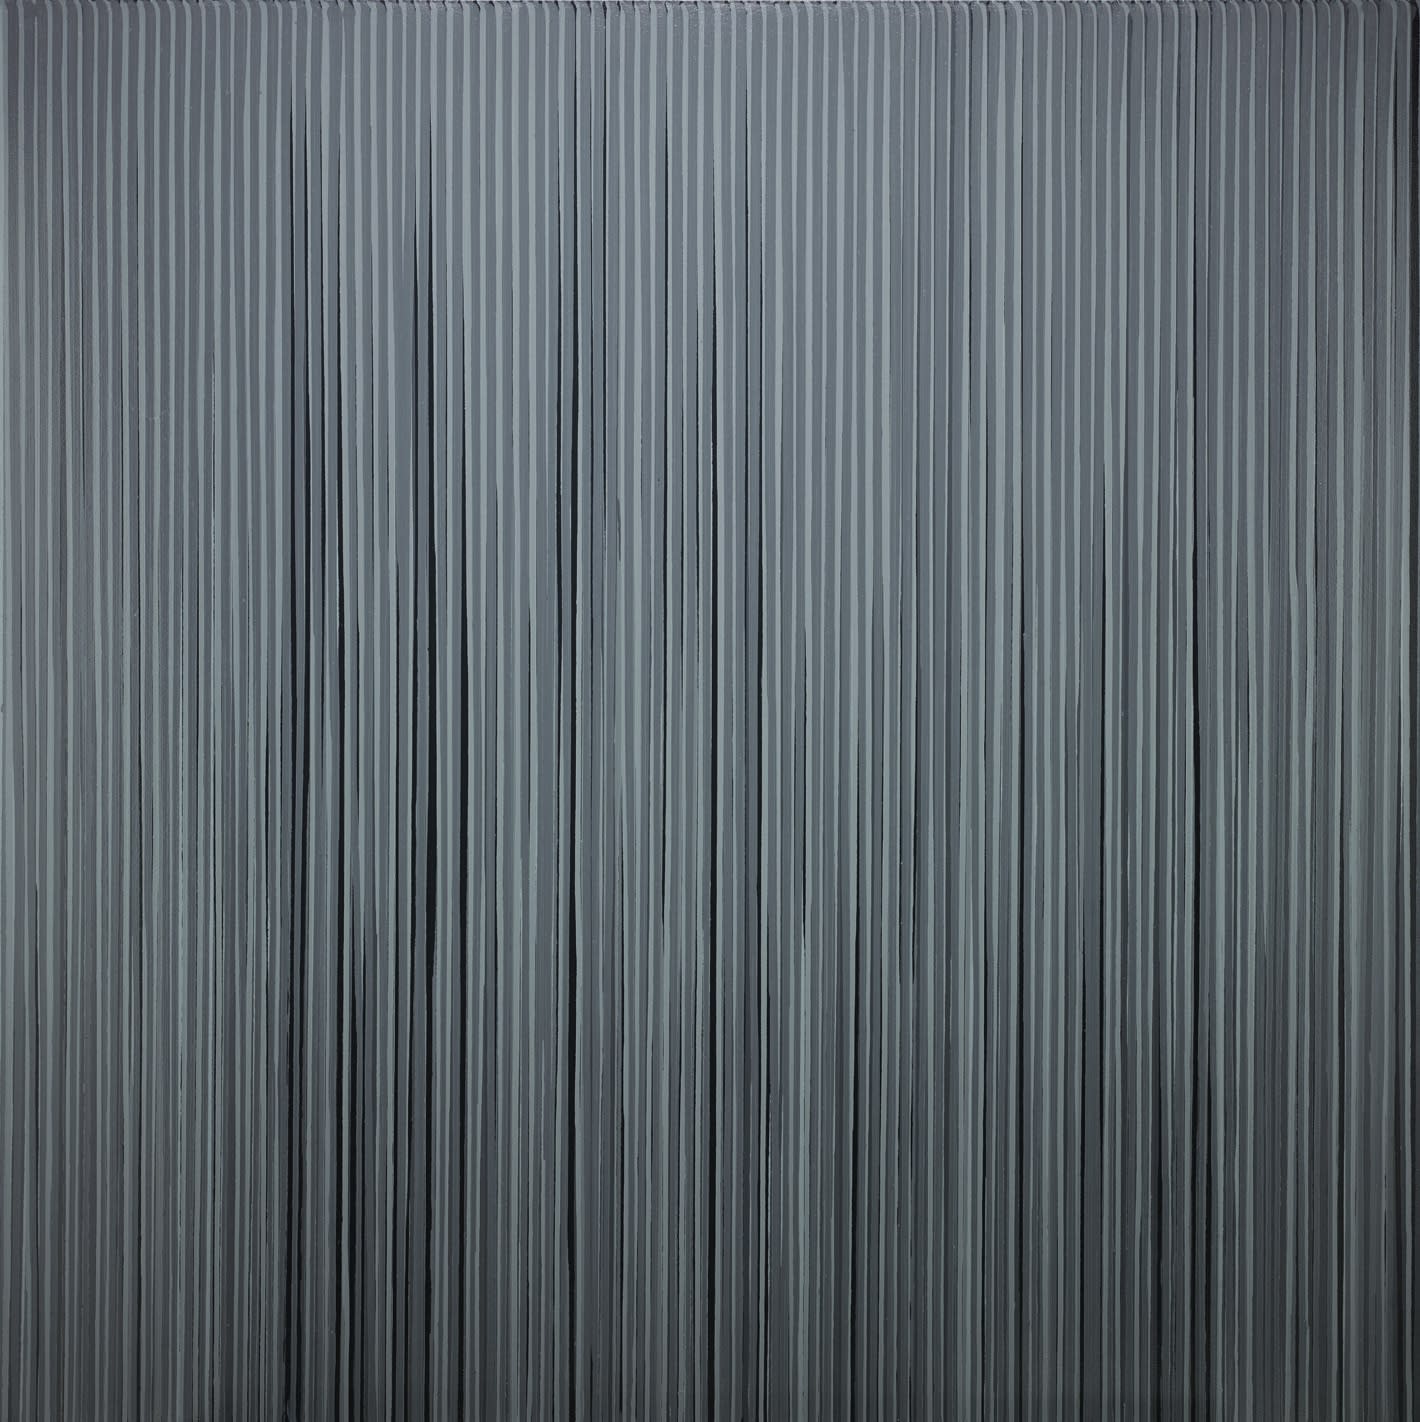 Poured Lines: Mixed Black, White and Greys, 1994